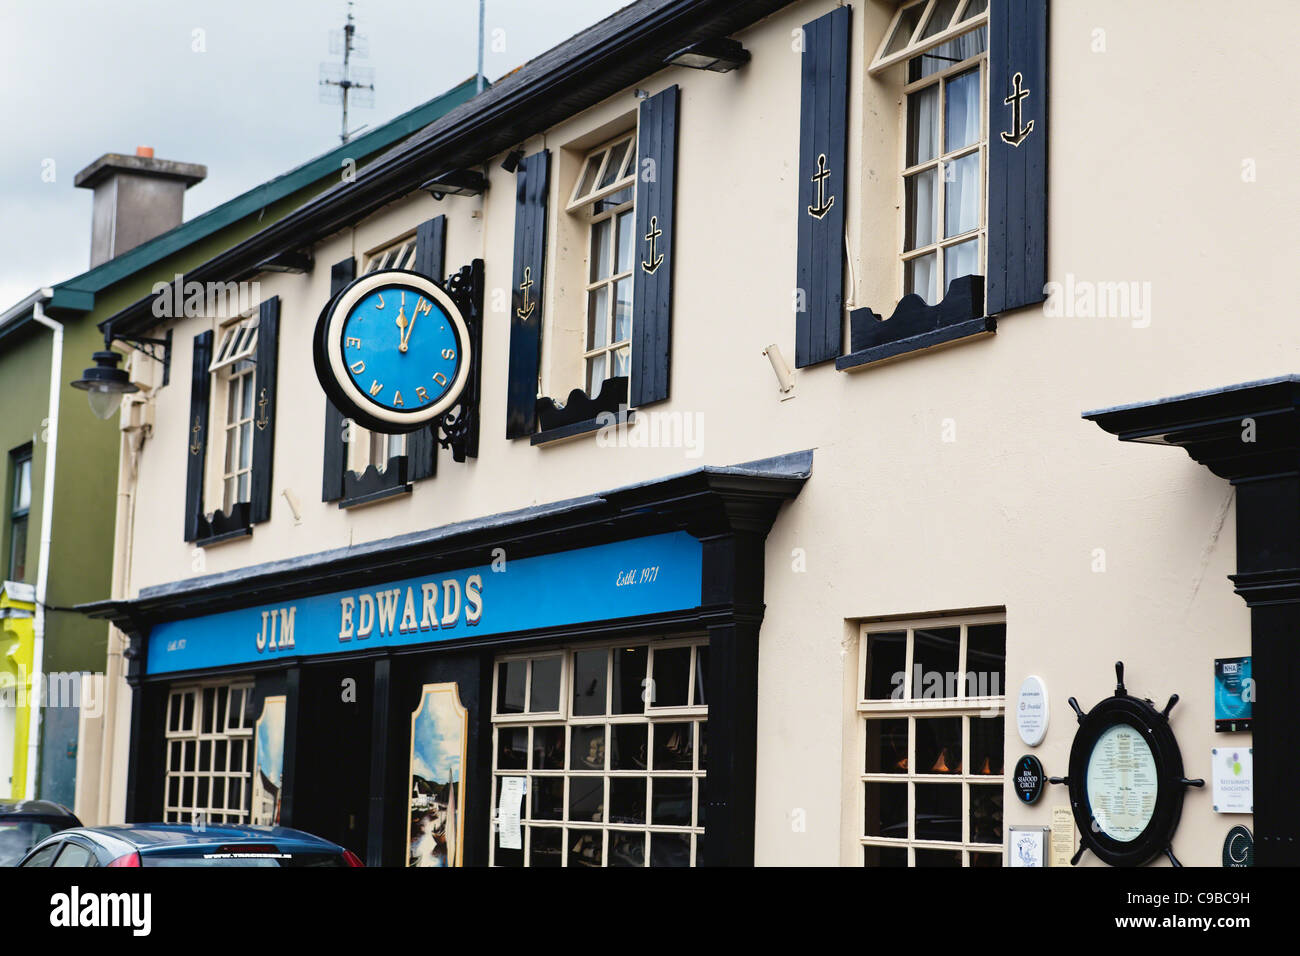 Exterior View of the Jim Edwards Restaurant and Pub, Kinsale, County Cork, Republic of Ireland Stock Photo